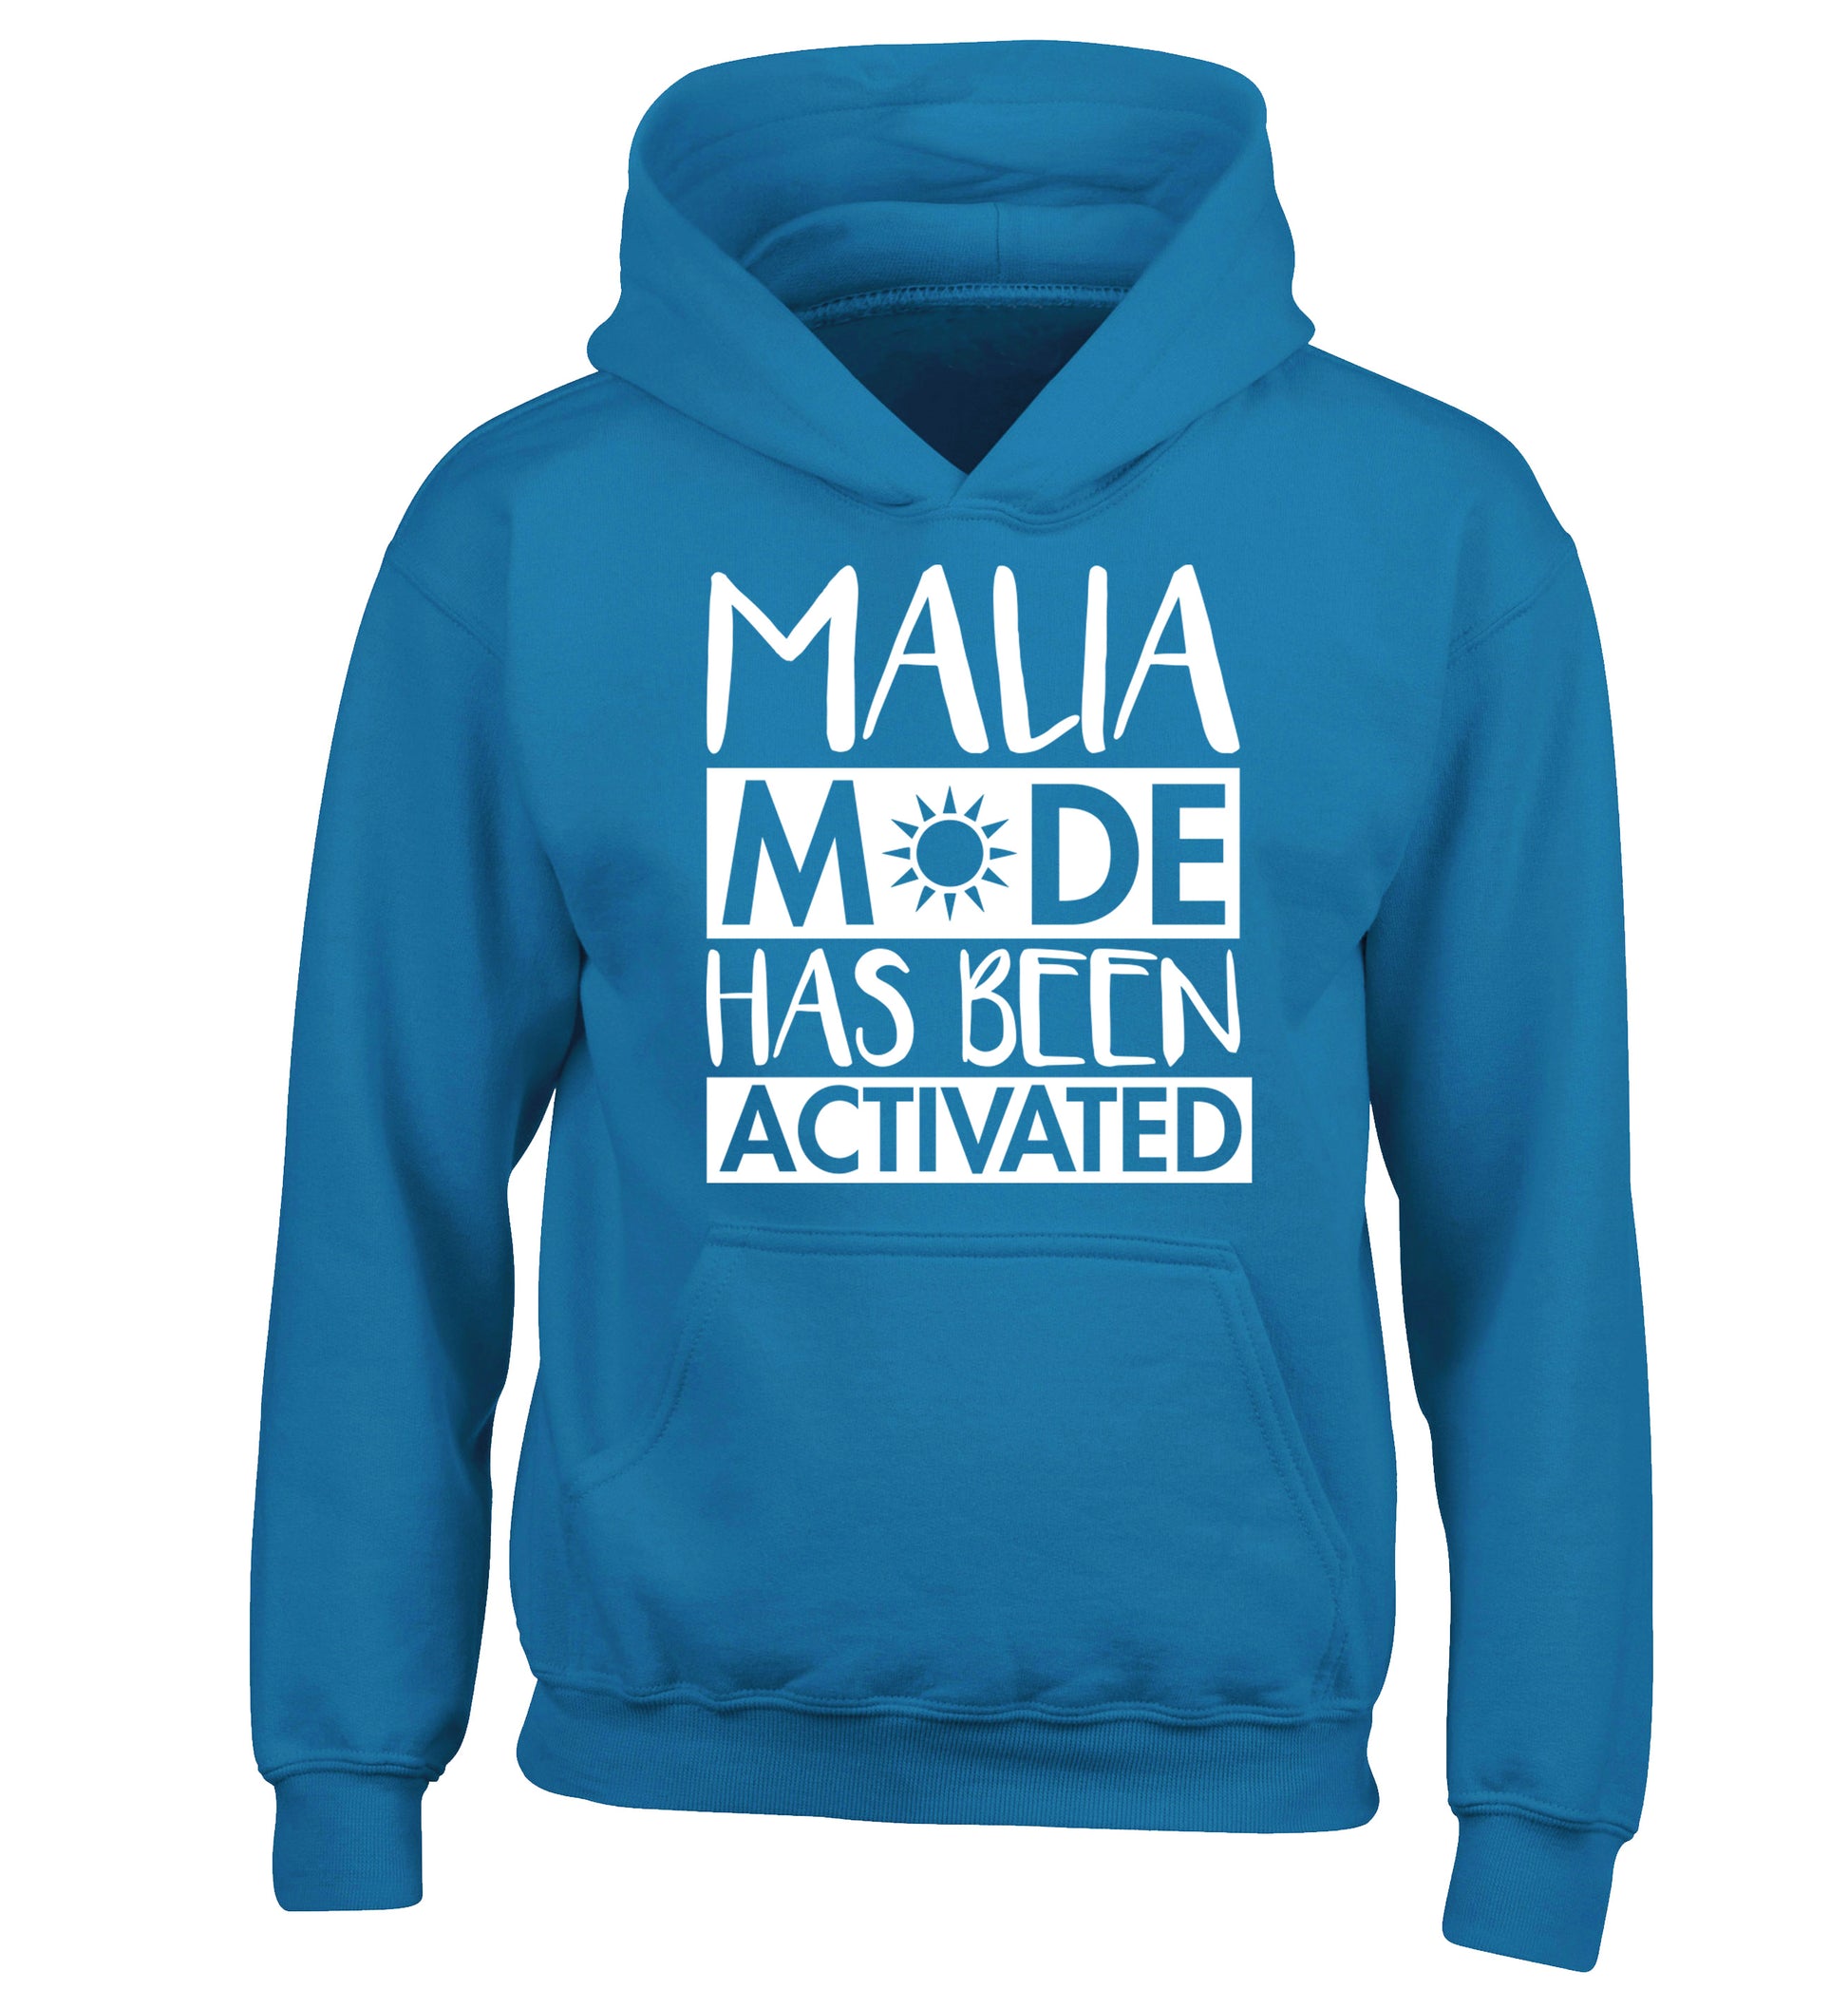 Malia mode has been activated children's blue hoodie 12-13 Years